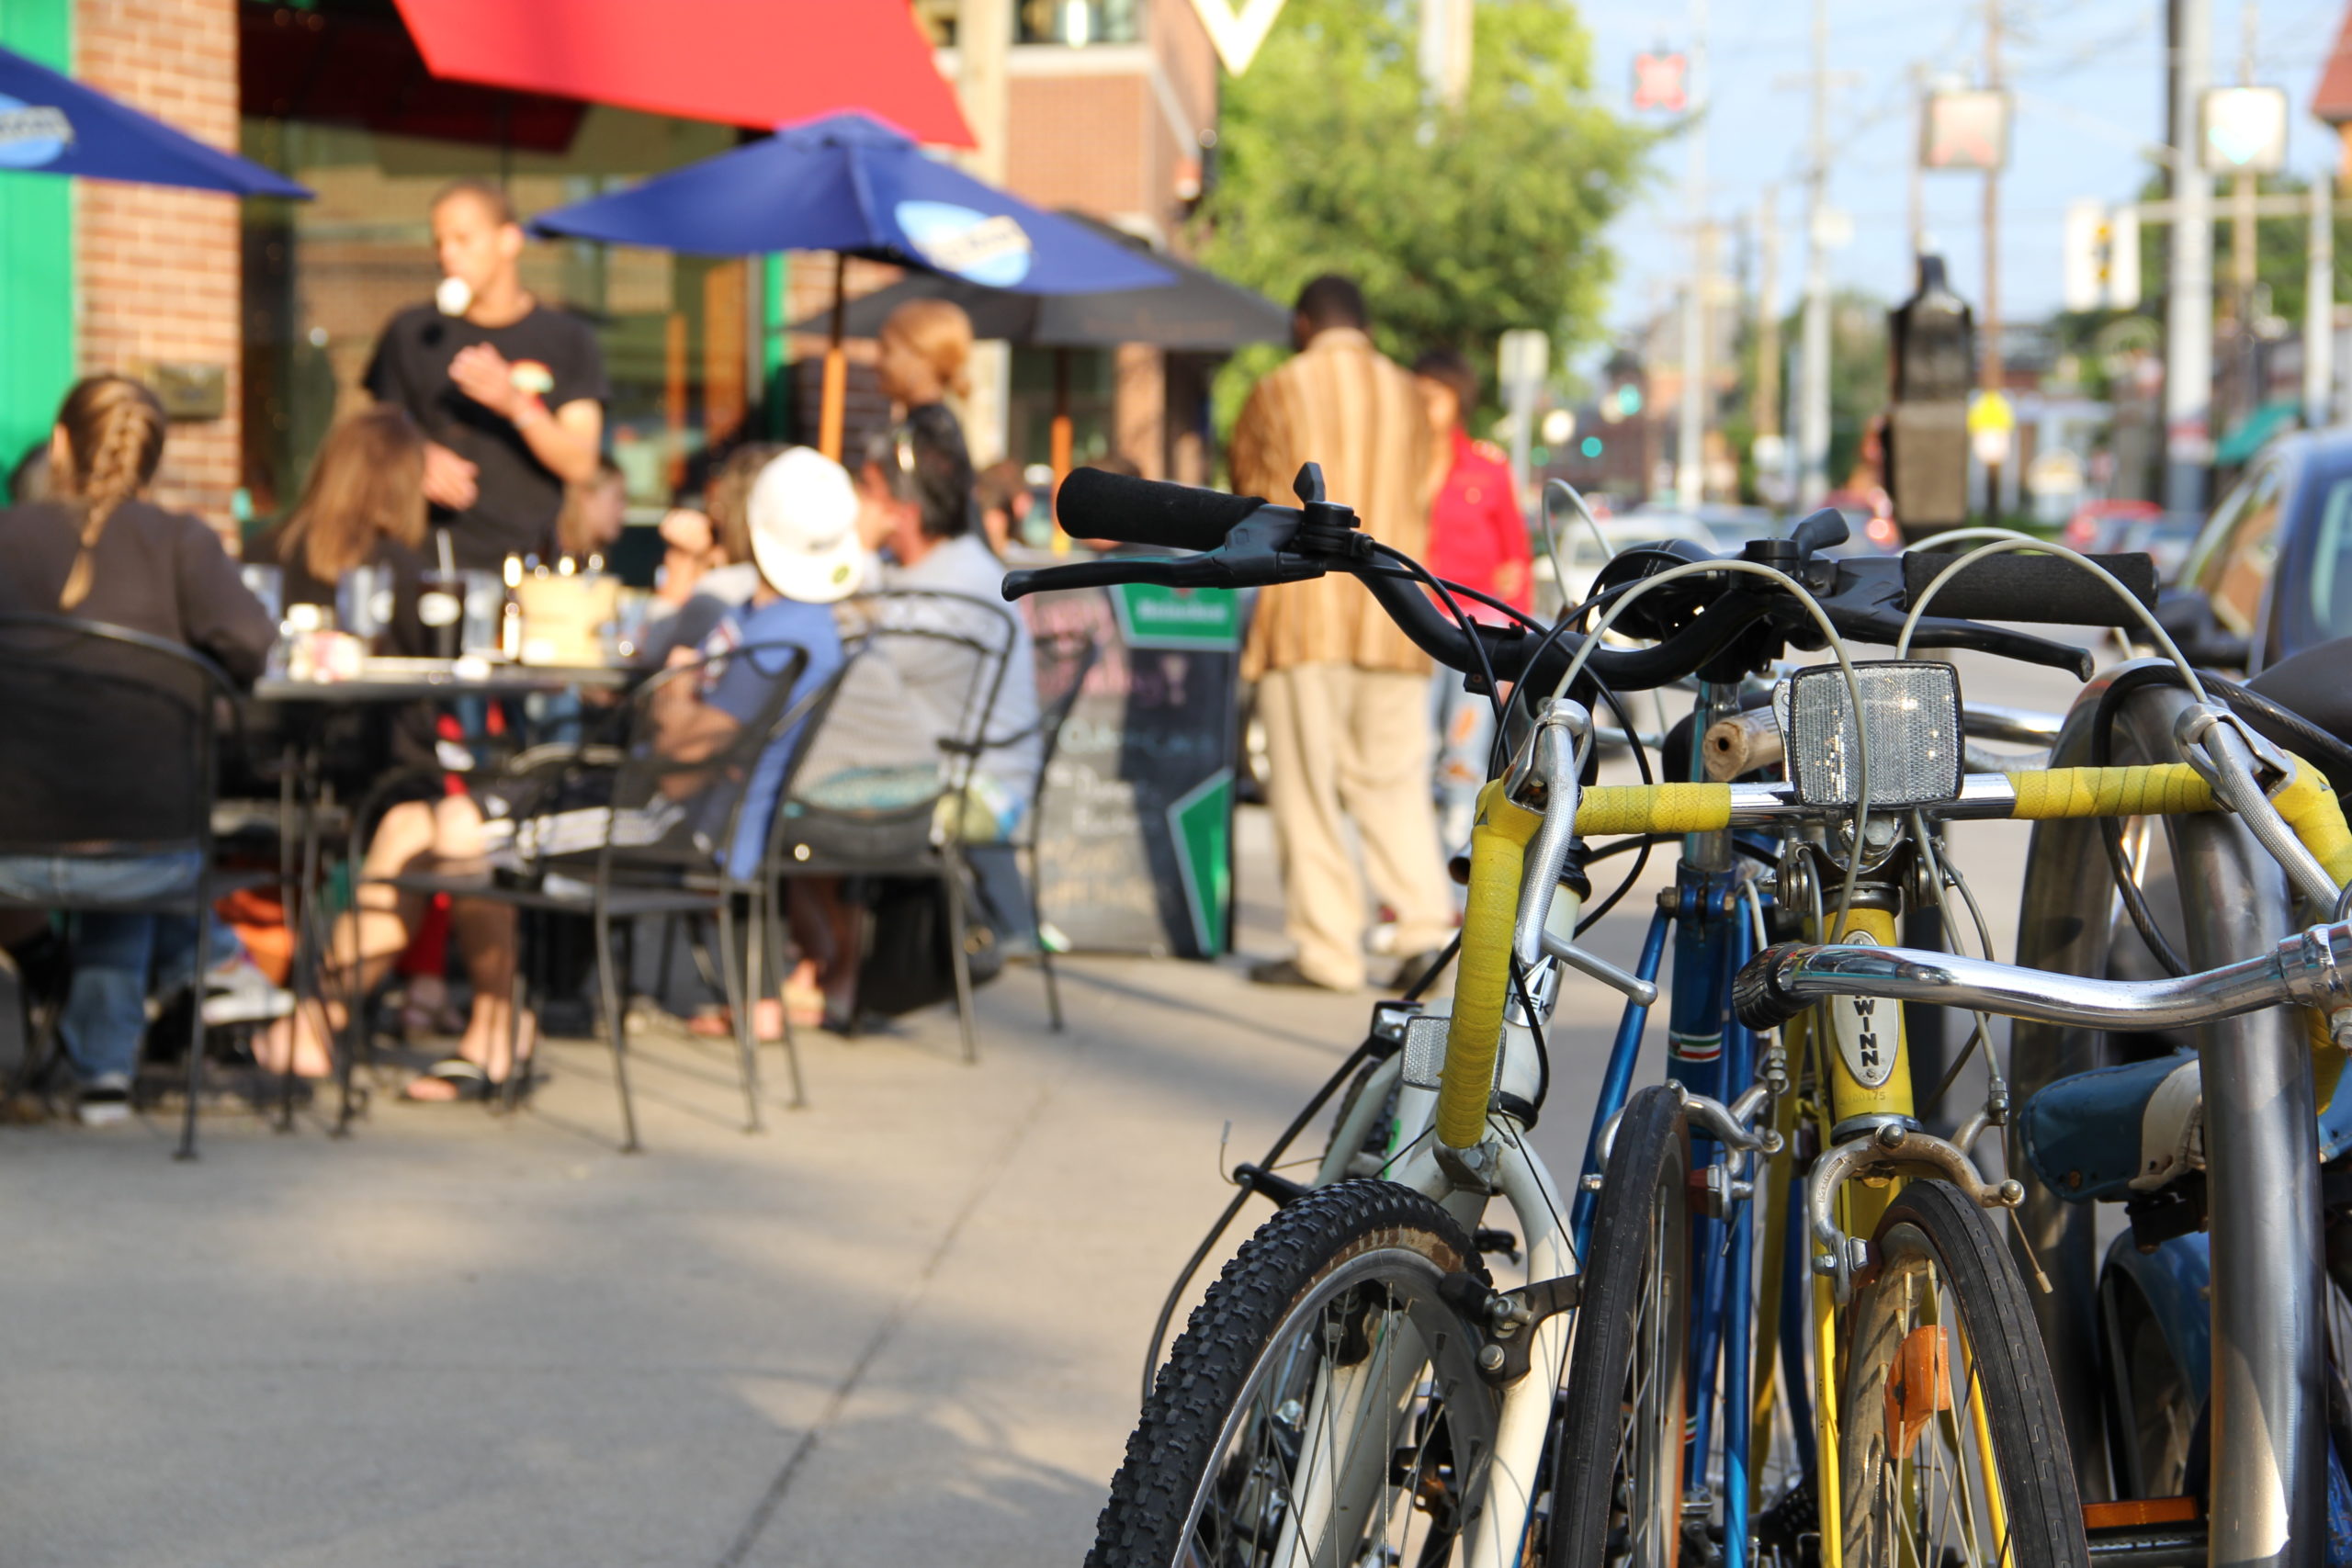 A yellow bike is tied to a bike stand with people eating brunch on a patio on the background.